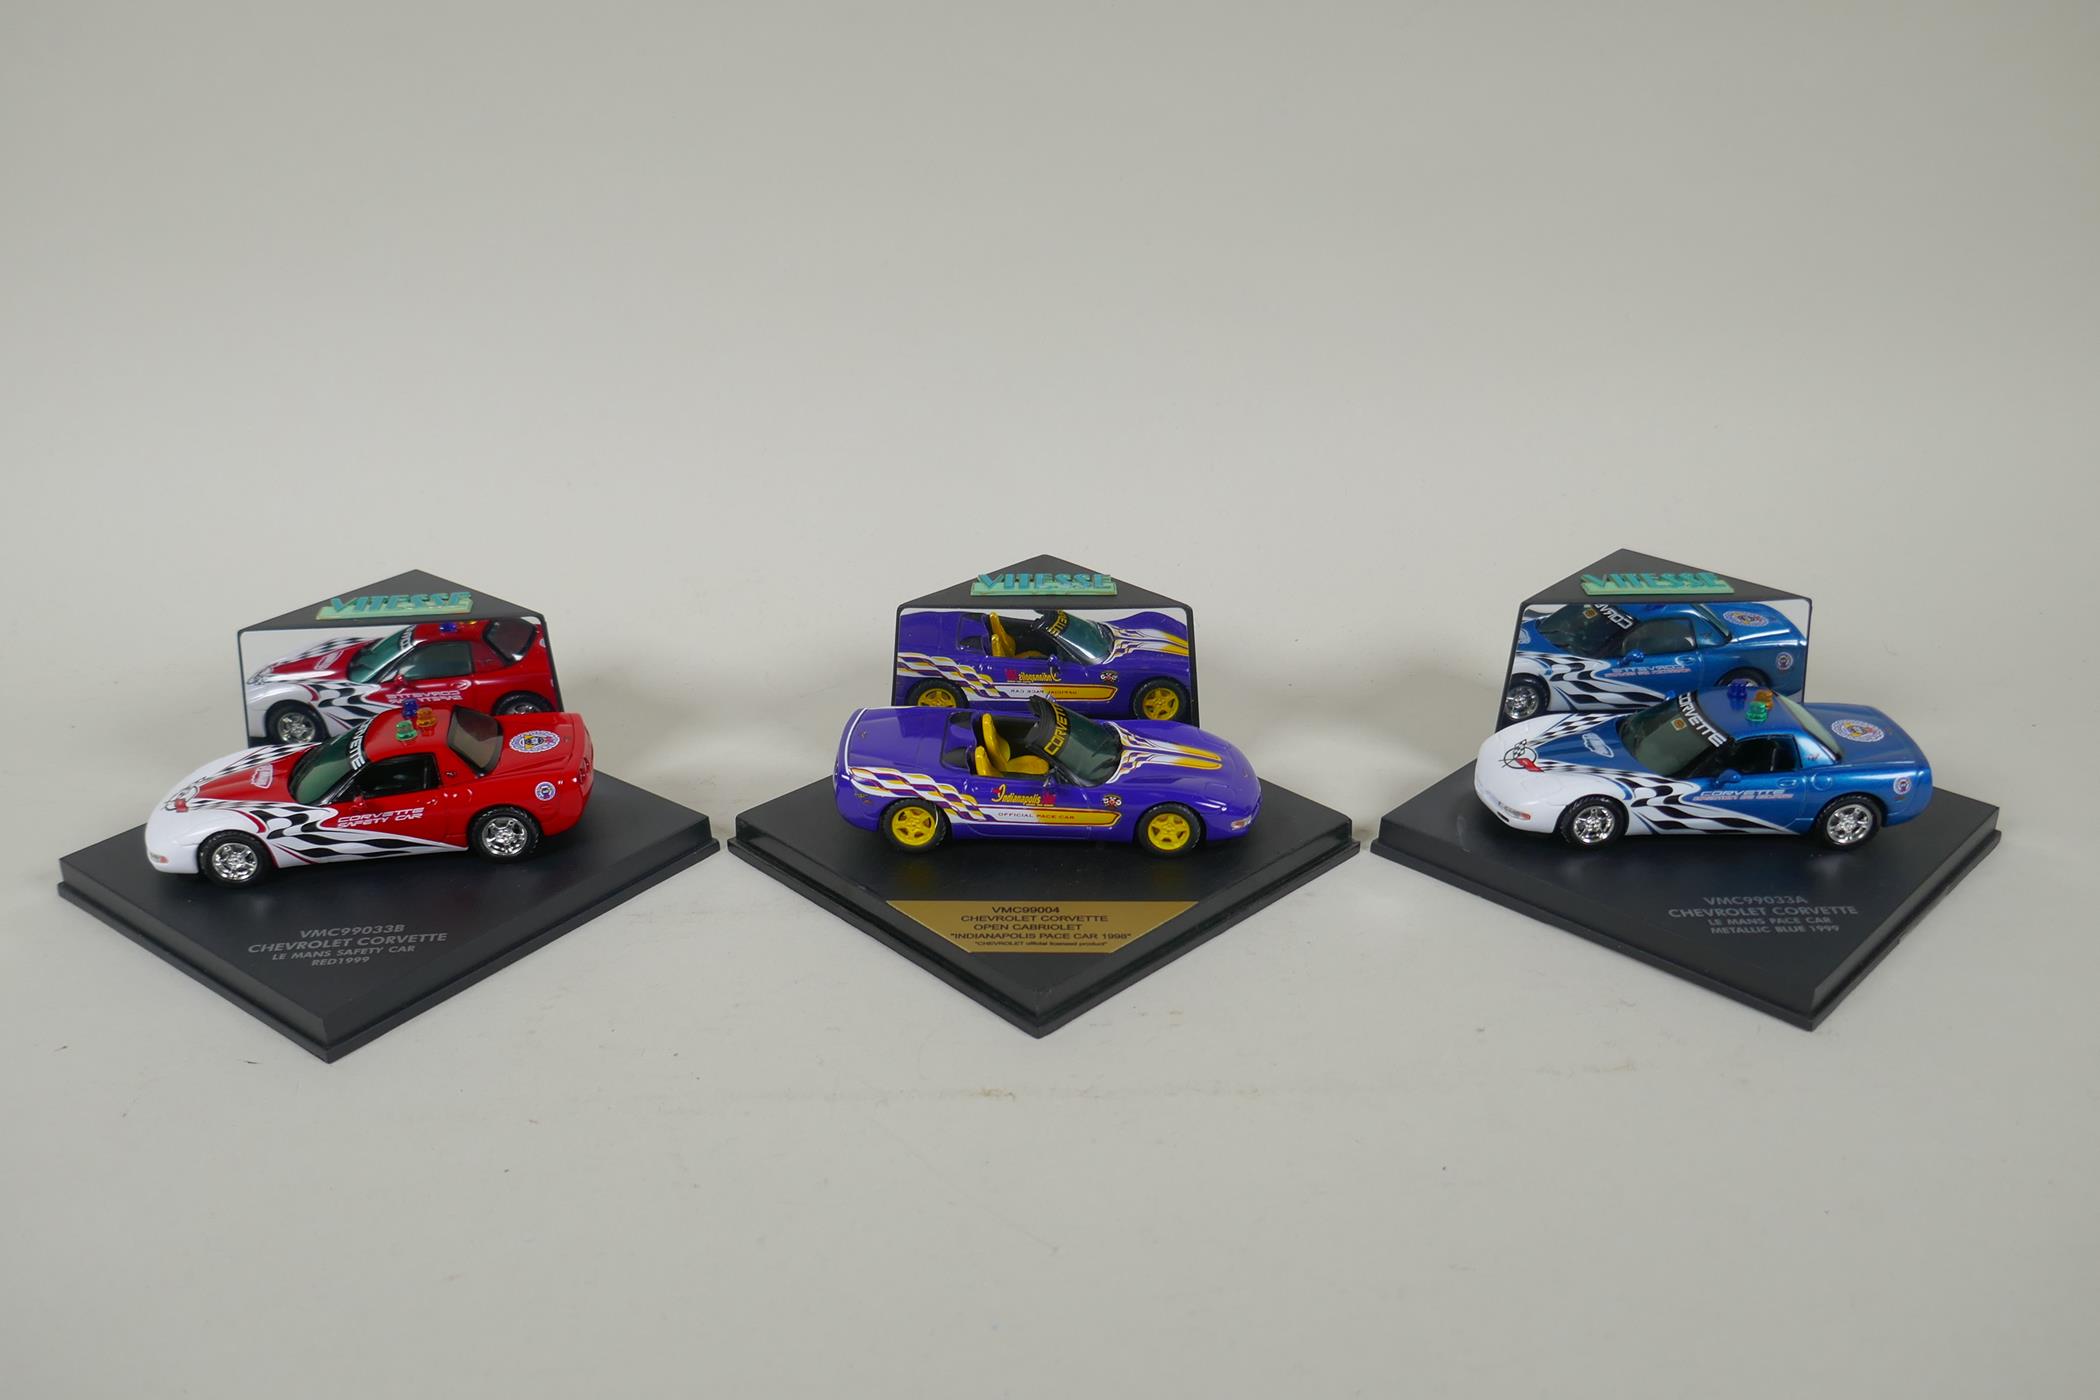 Twenty four 1:43 scale die cast model cars by various manufacturers including Auto Art, Spark, - Image 4 of 9